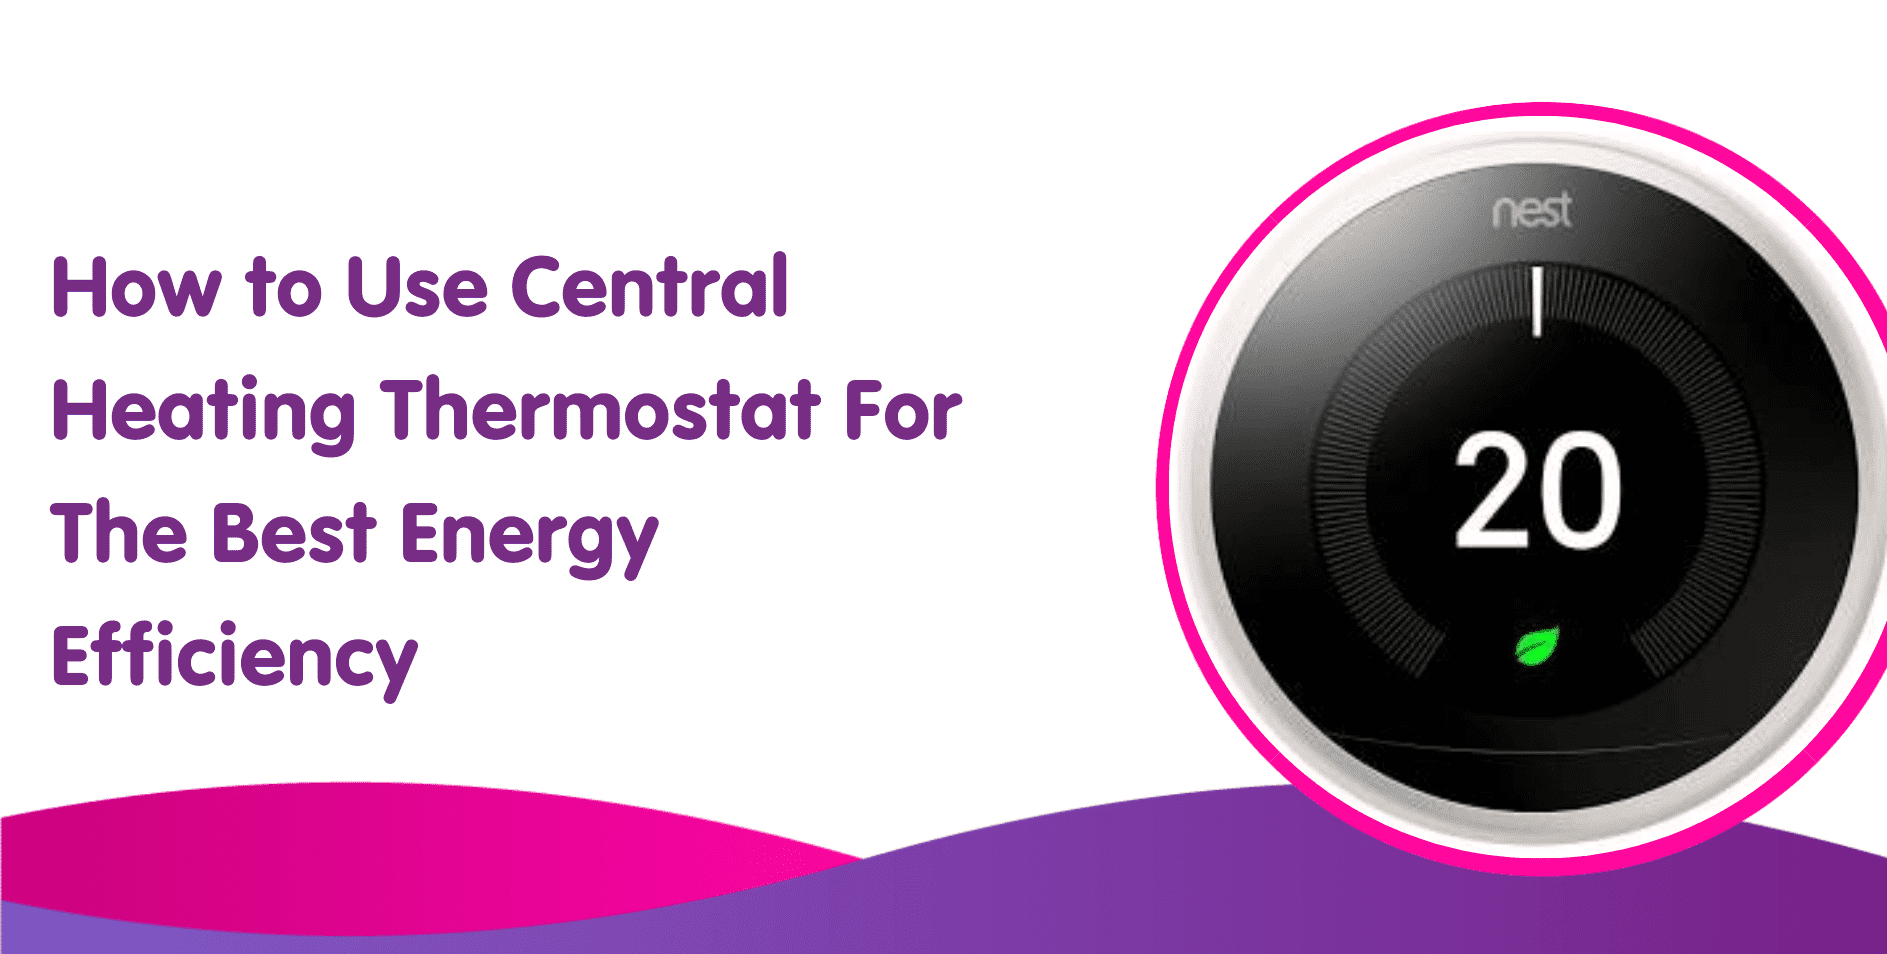 https://www.boilercentral.com/wp-content/uploads/How-to-Use-Central-Heating-Thermostat-For-The-Best-Energy-Efficiency.png